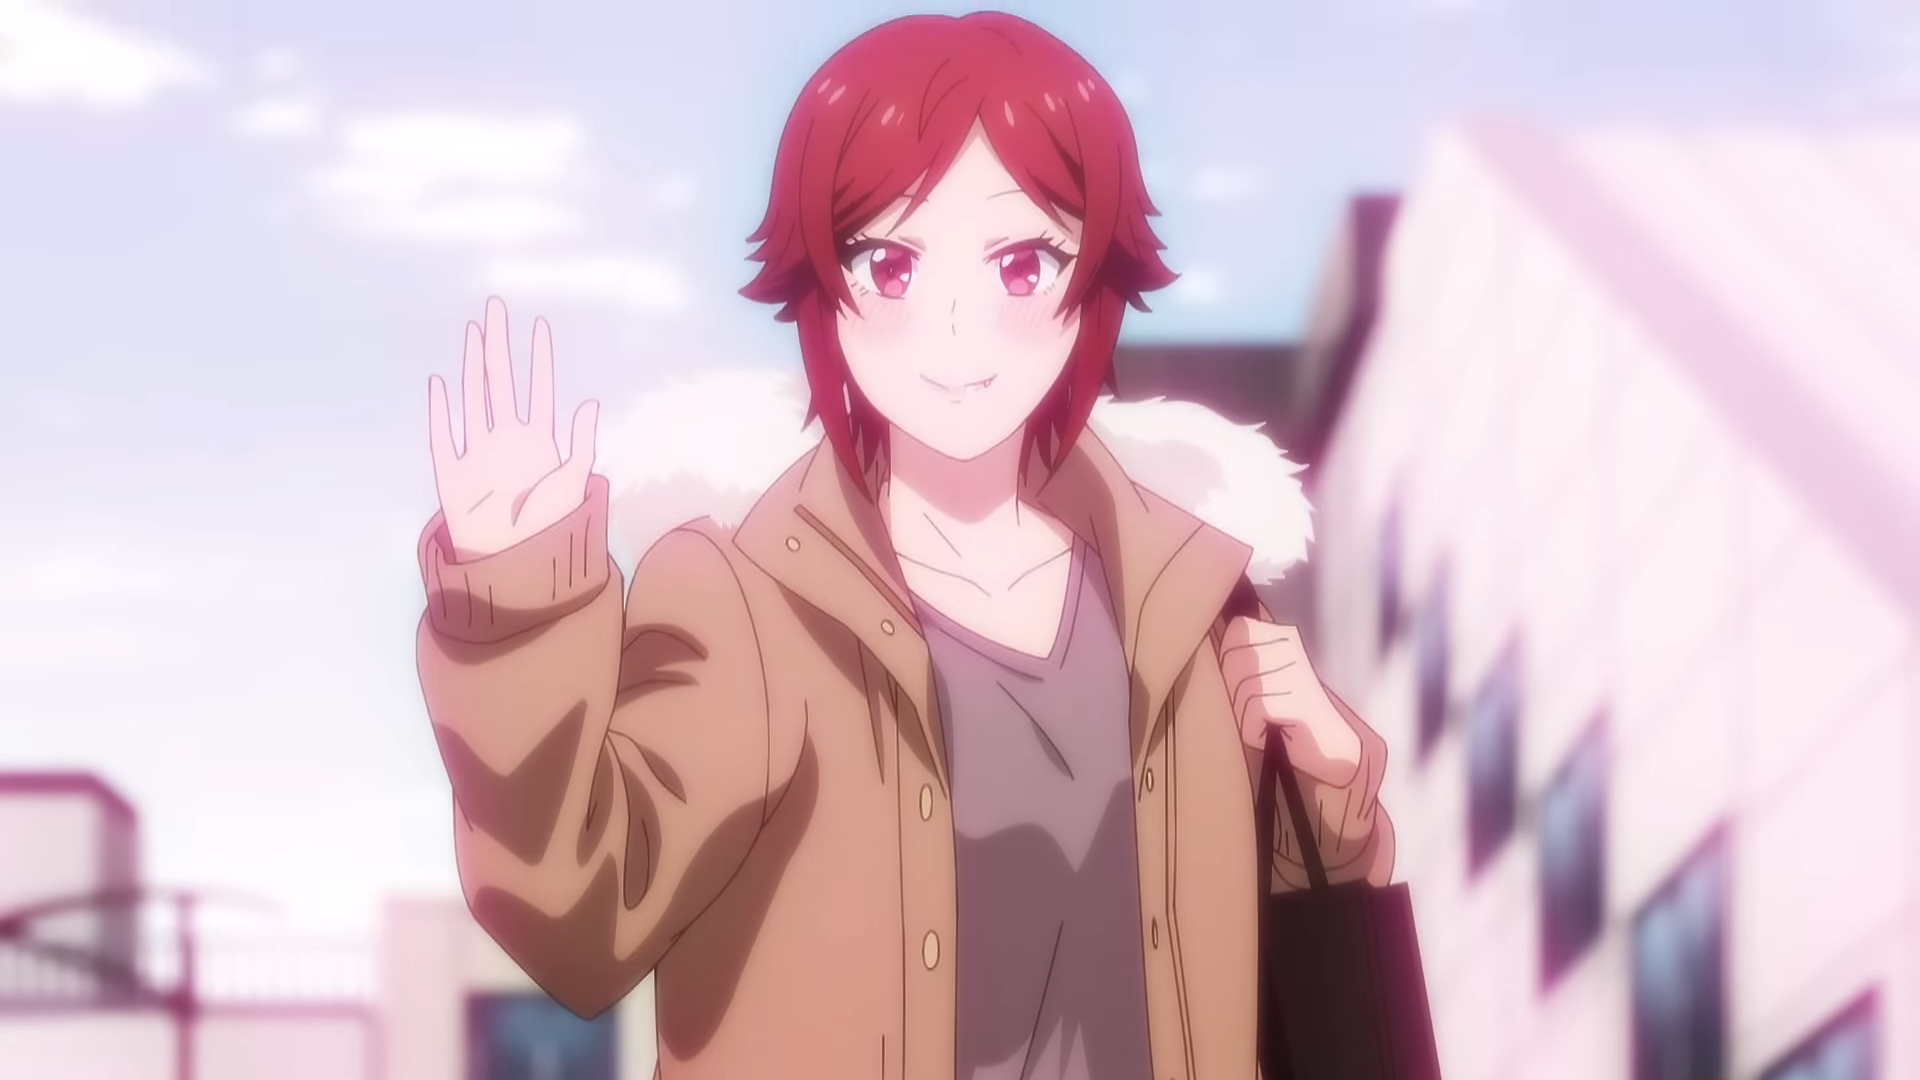 Tomo-chan Is a Girl Episode 7 Preview Video Revealed